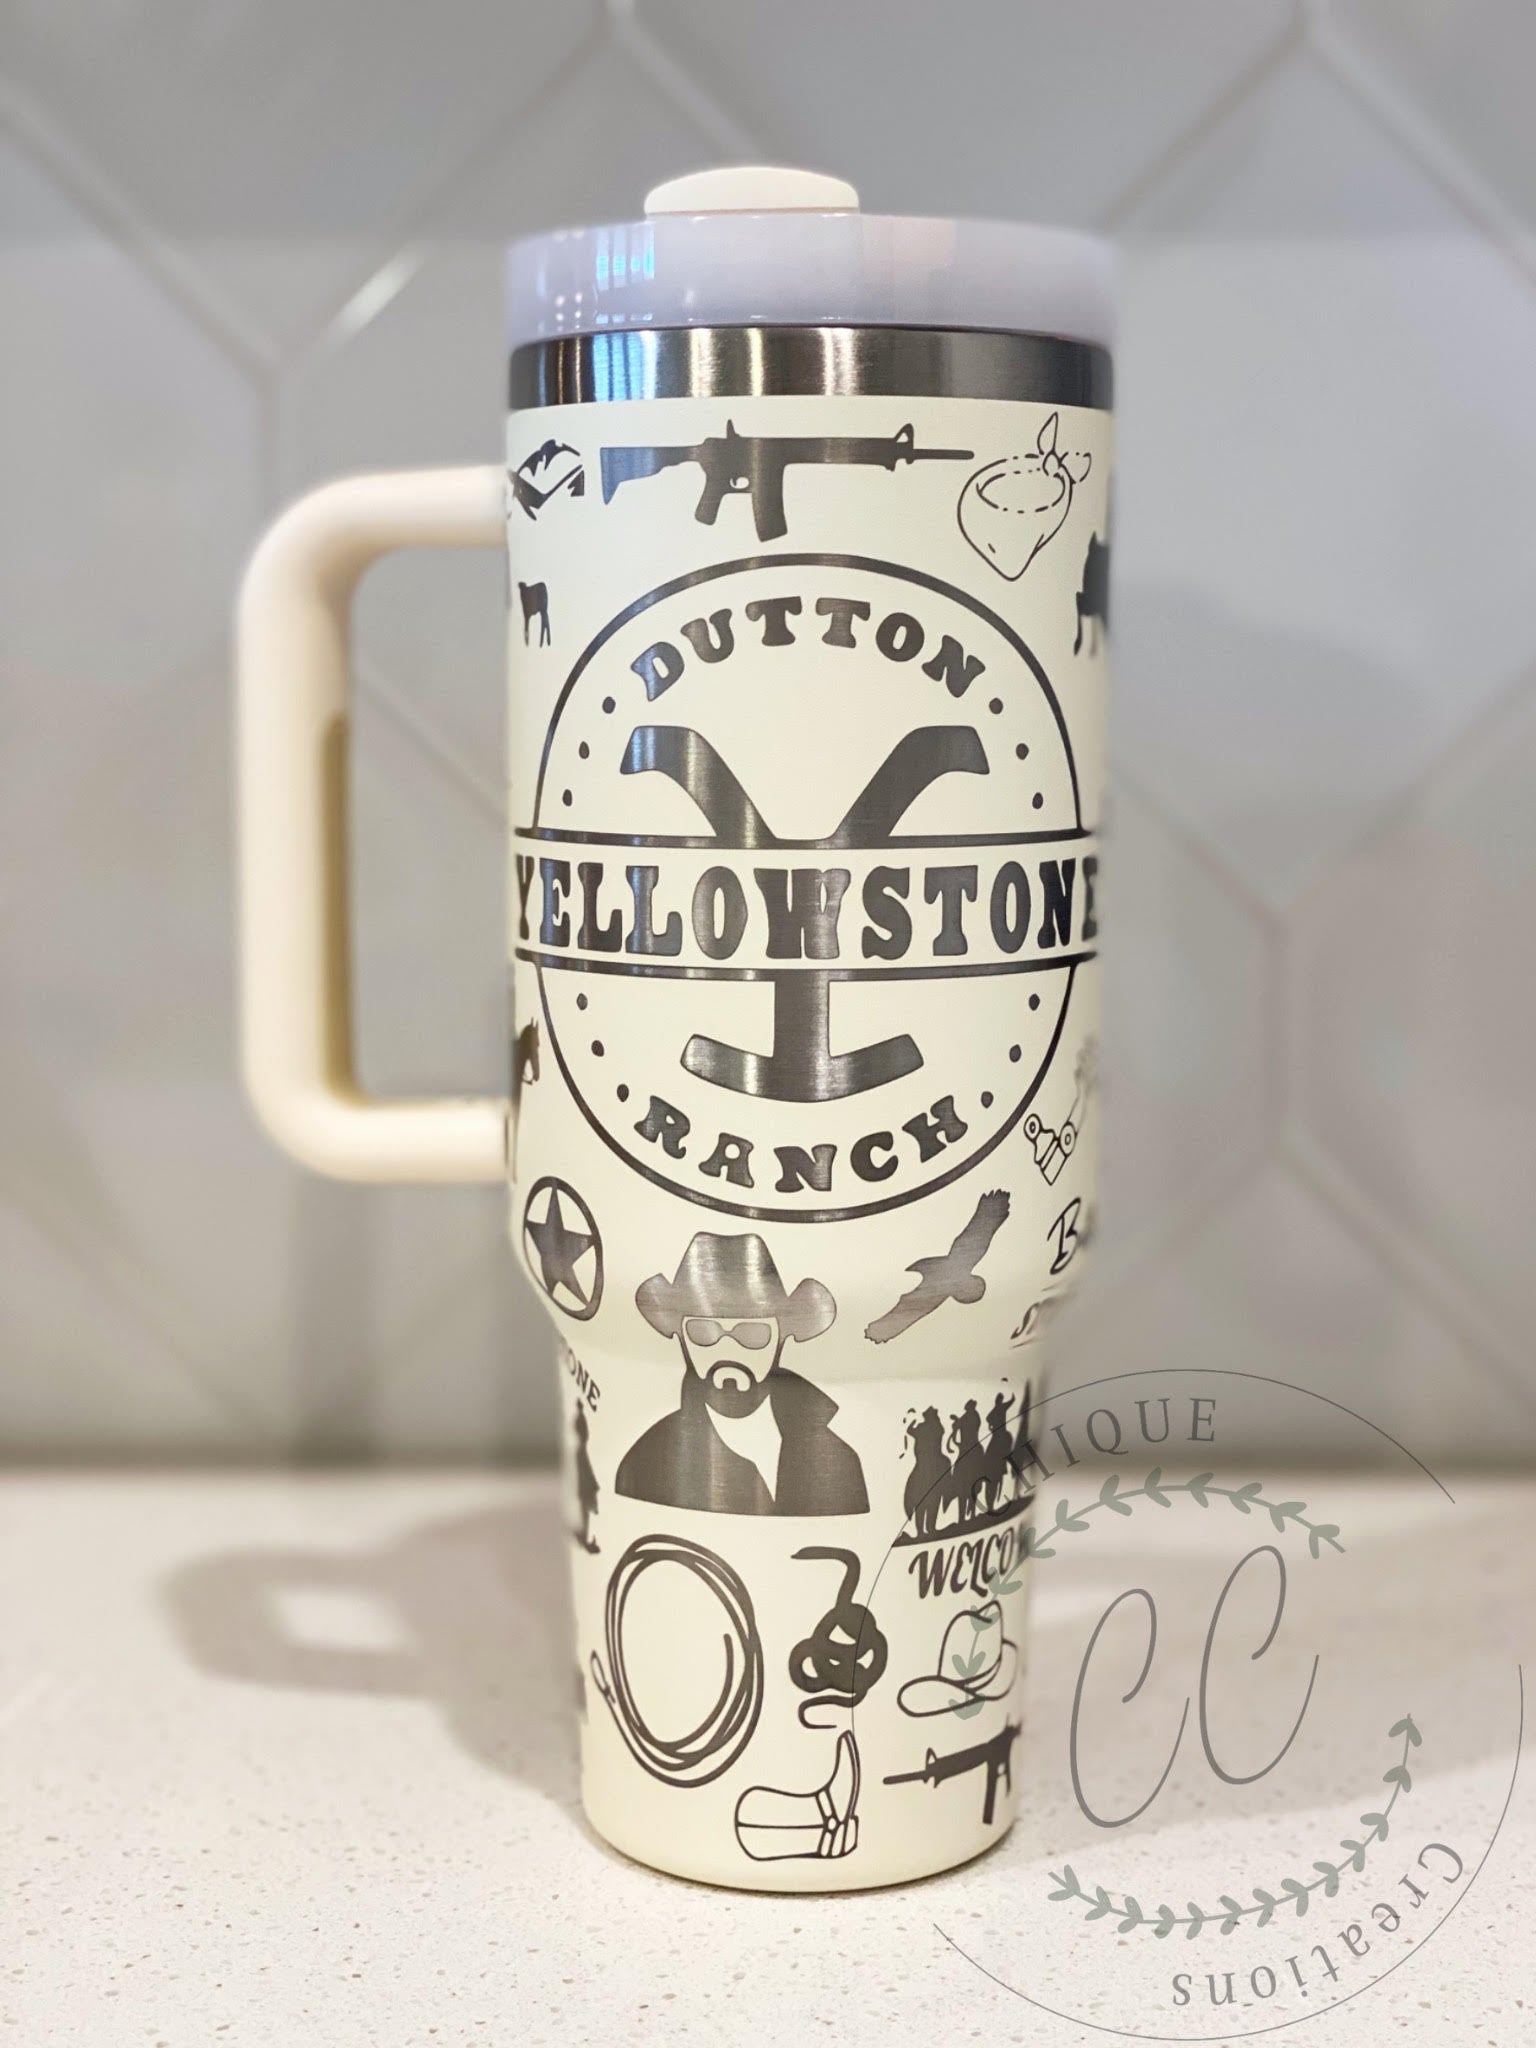 Laser Engraved Taylor Swift Tumbler With Handle, Stanley, Eras Tour –  ChiqueCreations